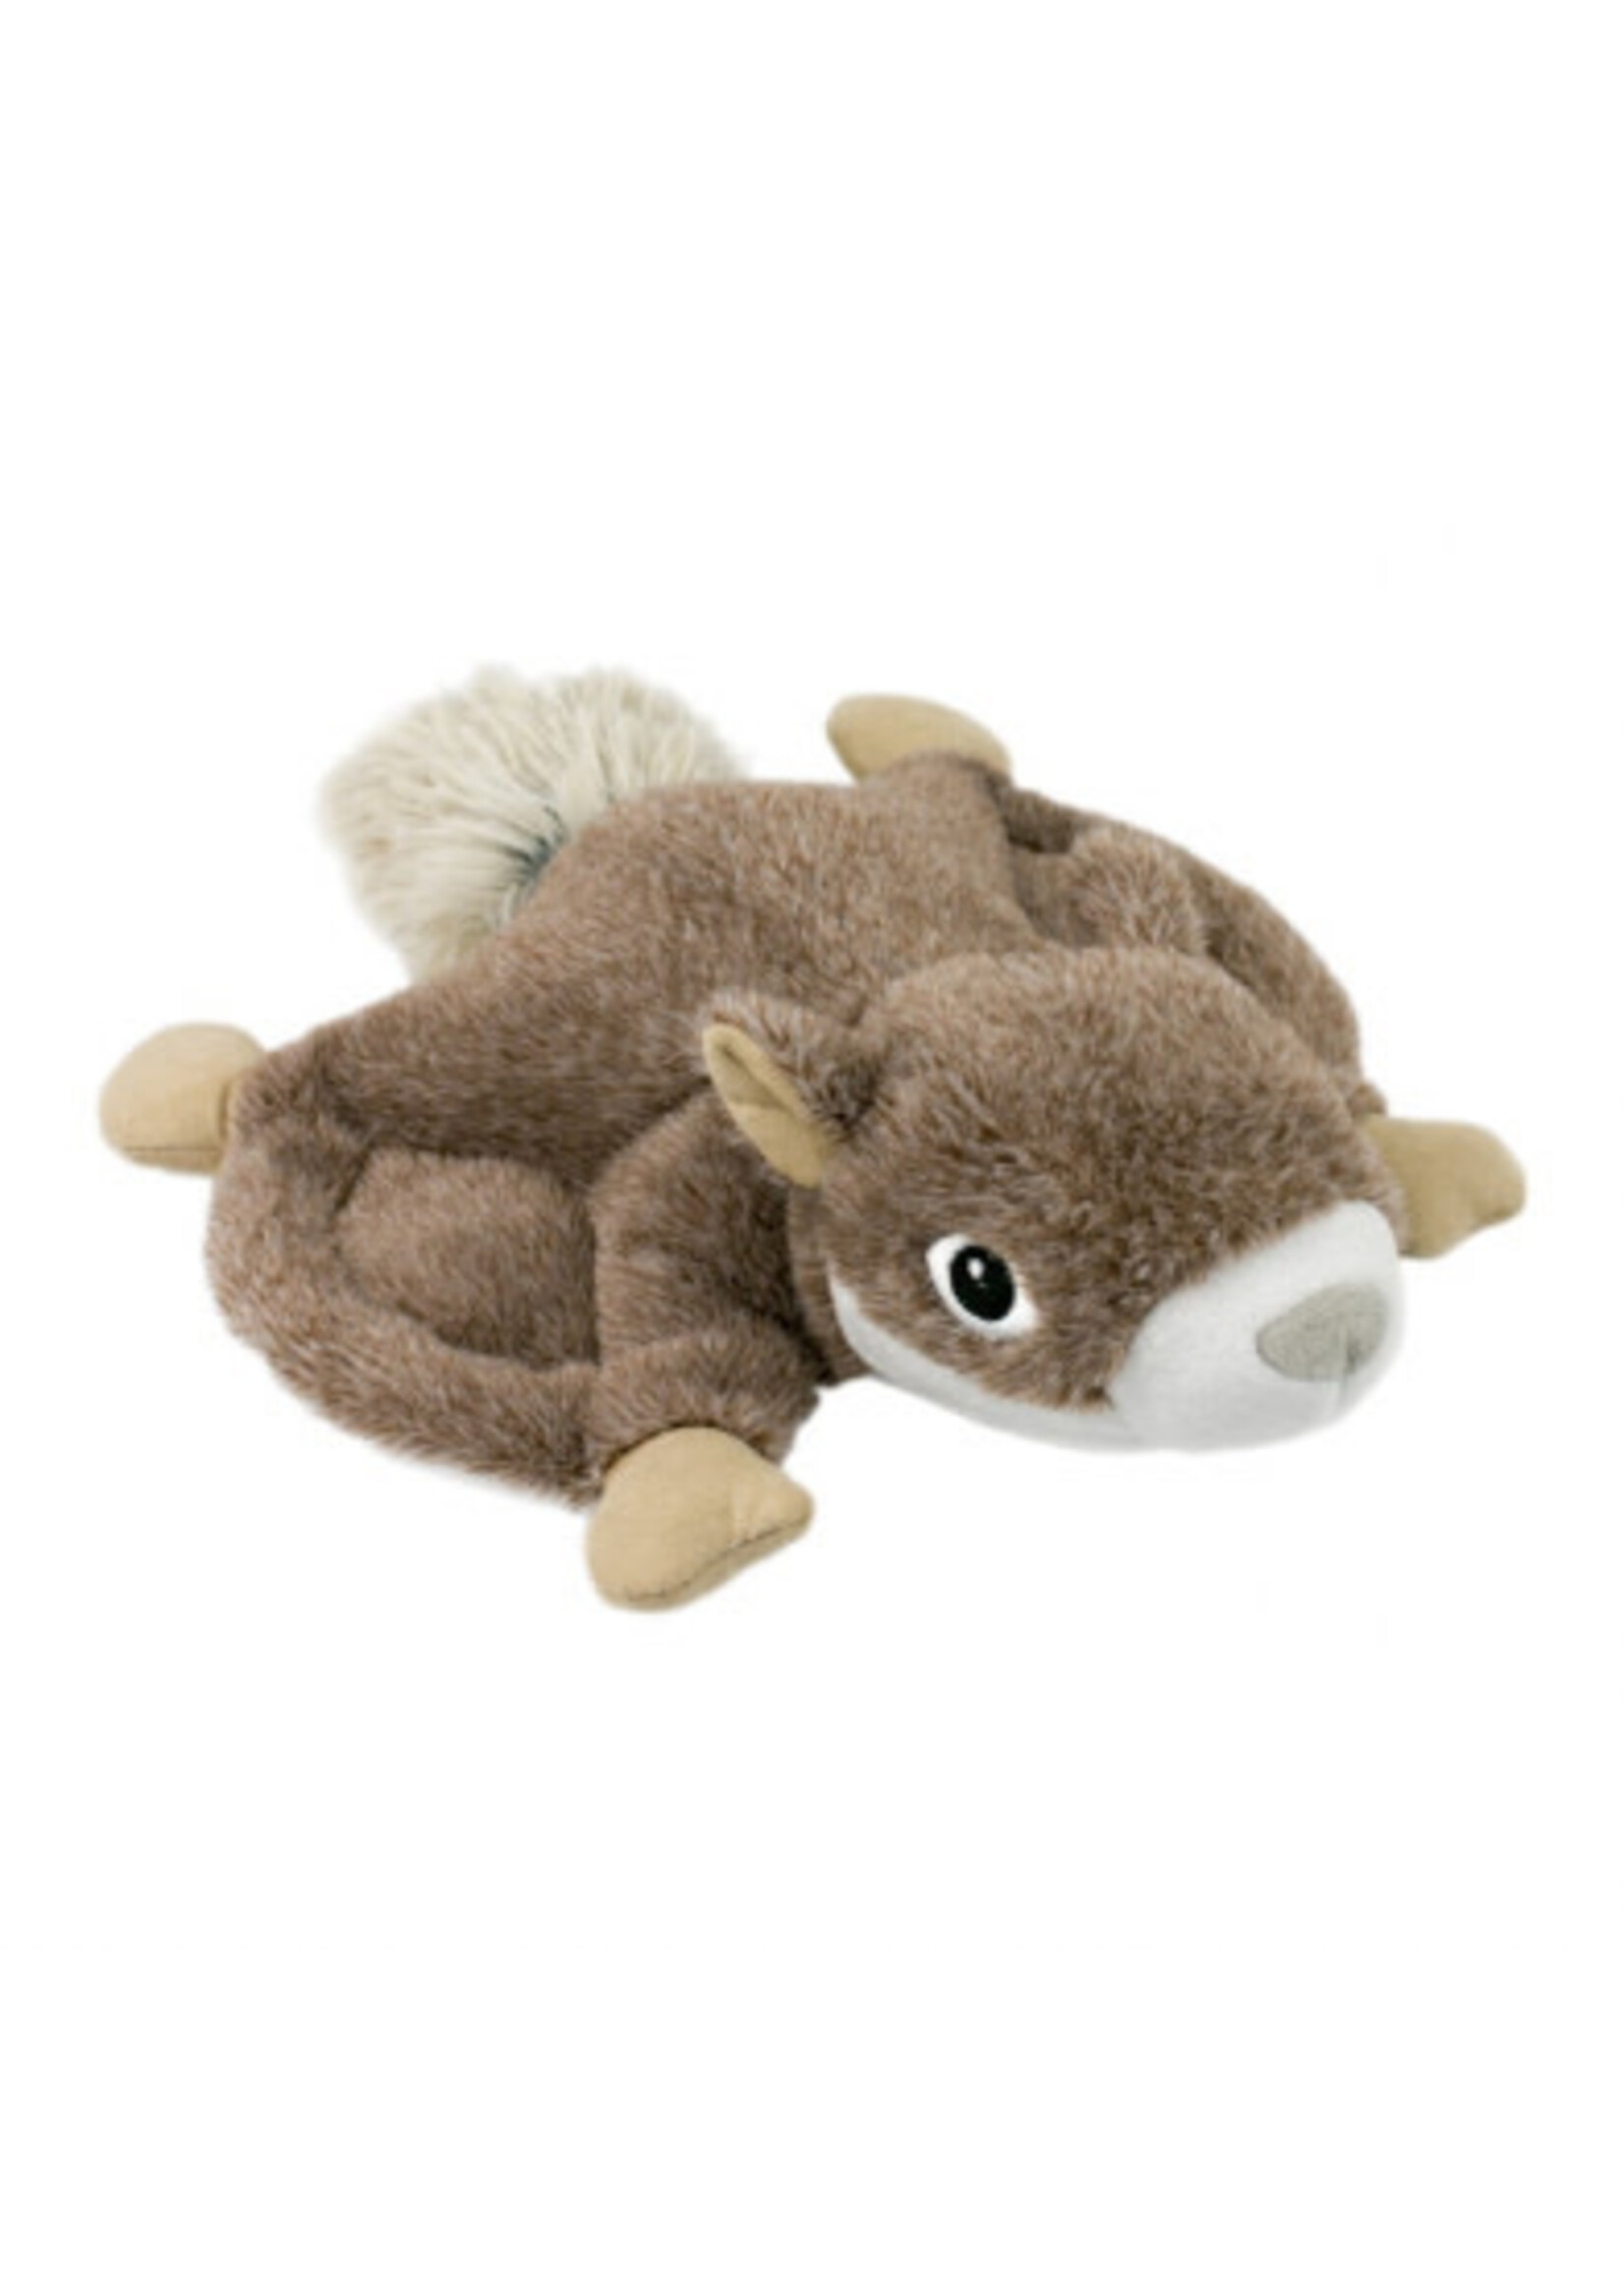 Tall Tails Tall Tails - 12" Flying Squirrel Fetch Toy w/Squeak & Crinkle